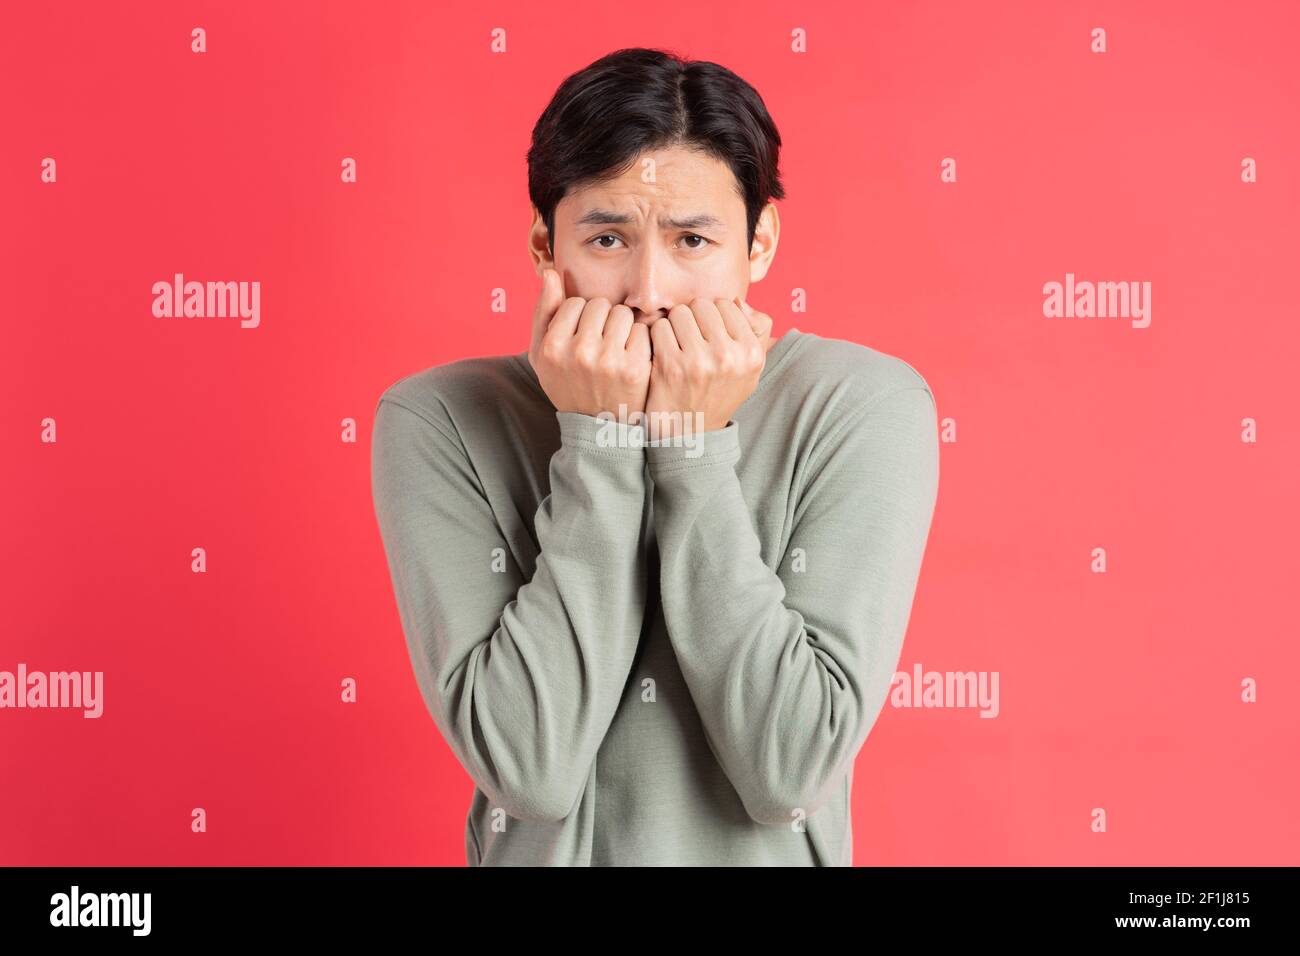 A photo of a handsome Asian man covering his face with his hands in fear Stock Photo